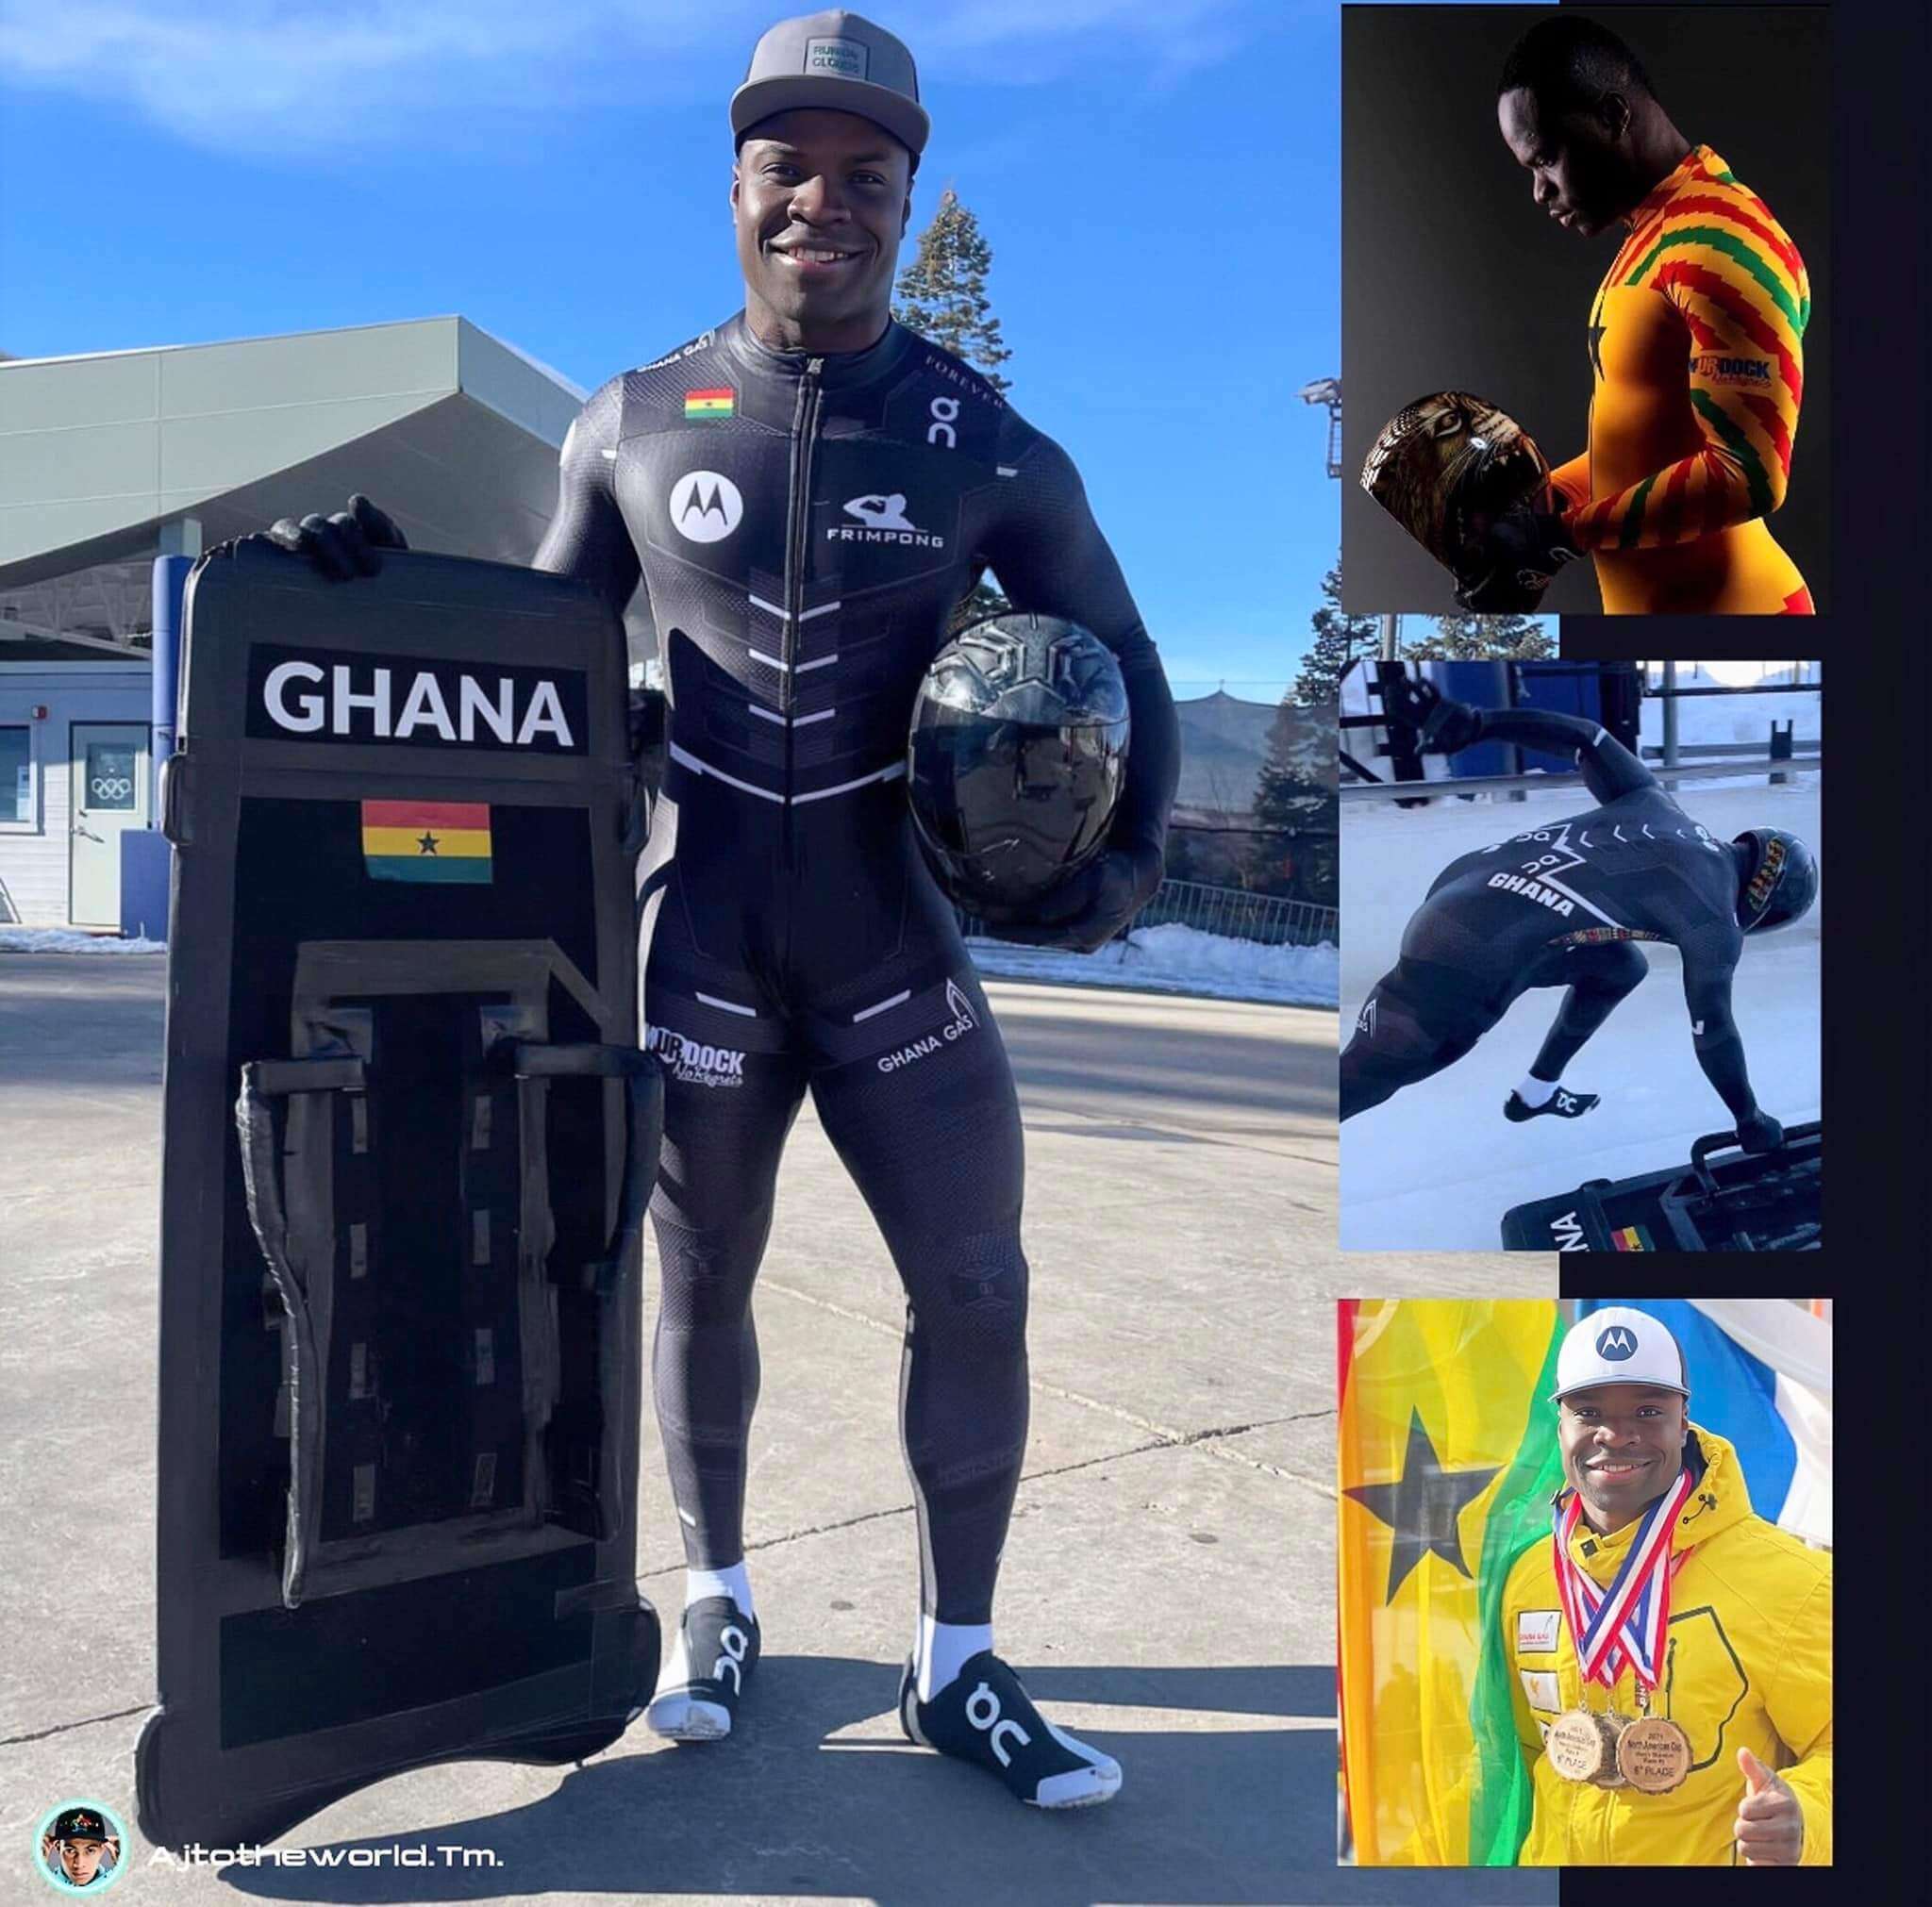 Akwasi Frimpong: The First Skeleton Athlete from Africa to Win an Elite Skeleton Race